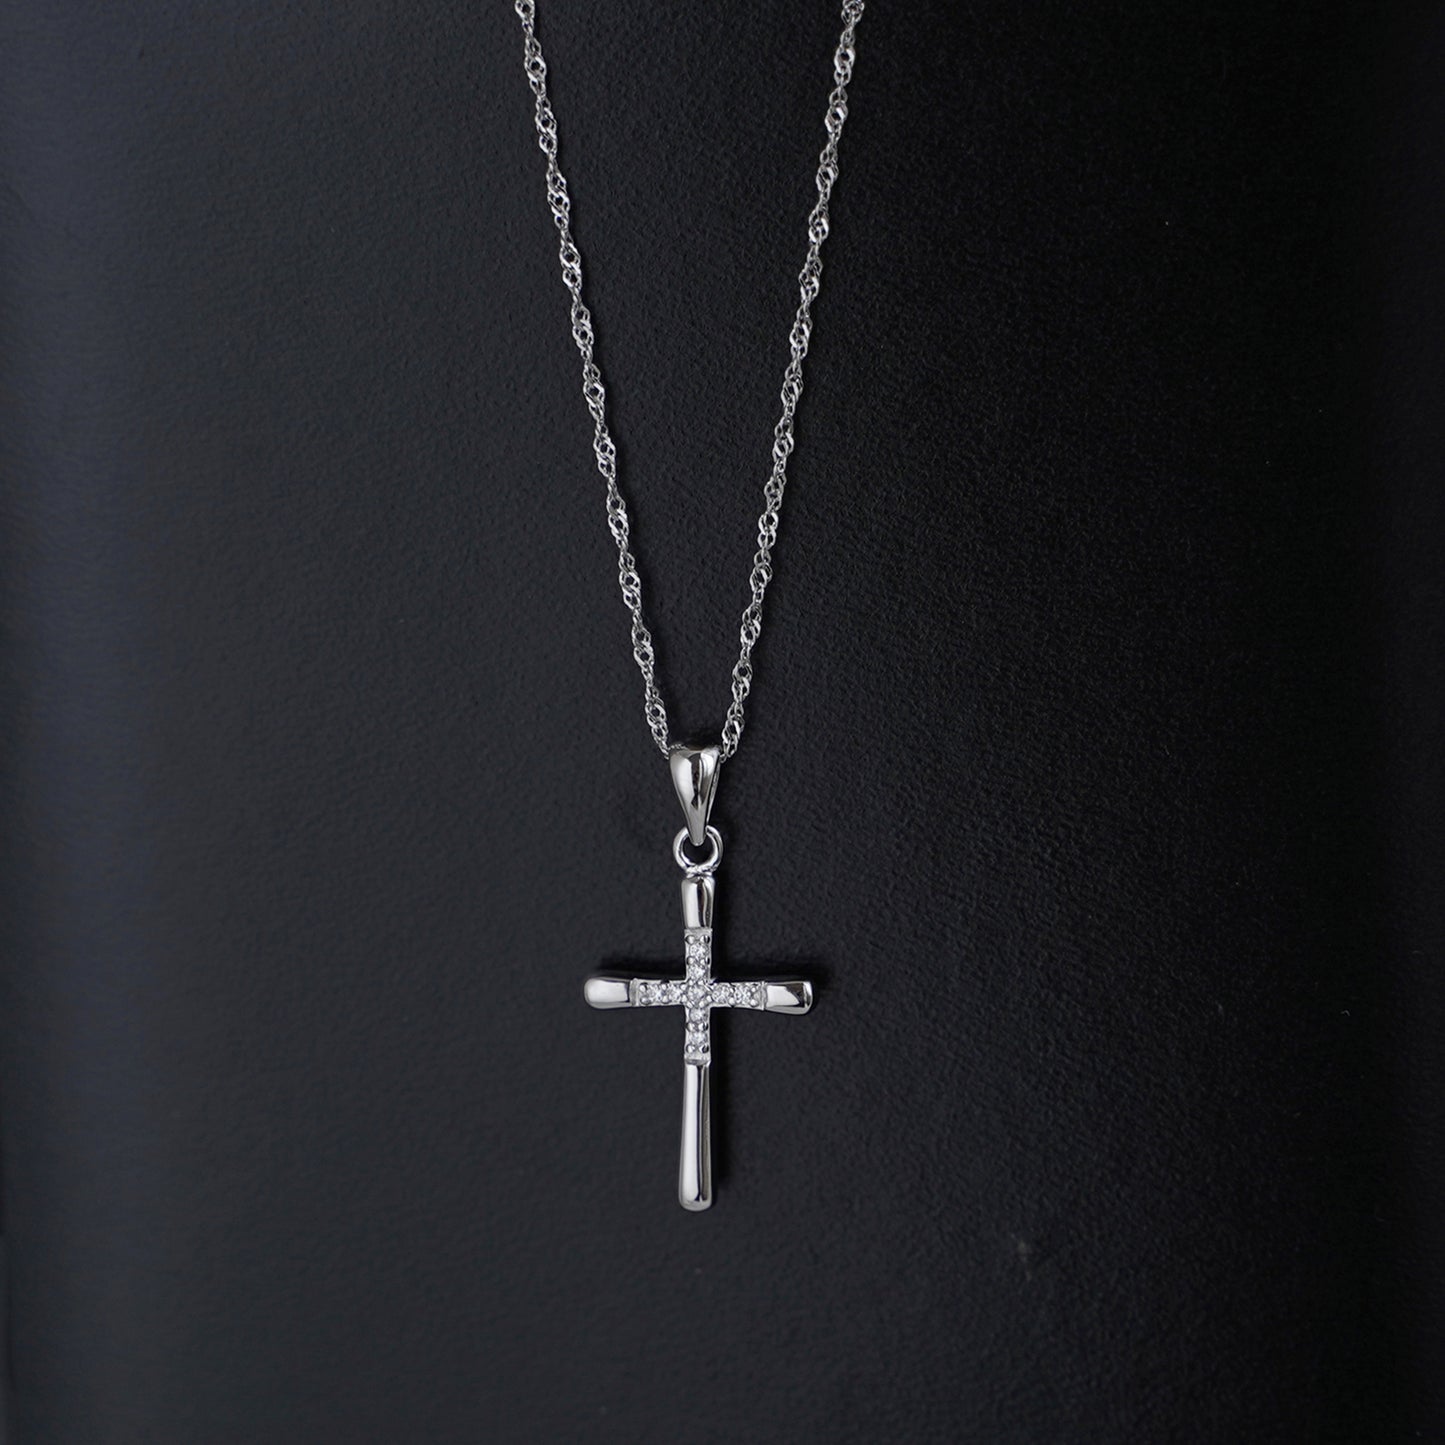 Sterling Silver CZ Crusted Cross Pendant Necklace with Chain